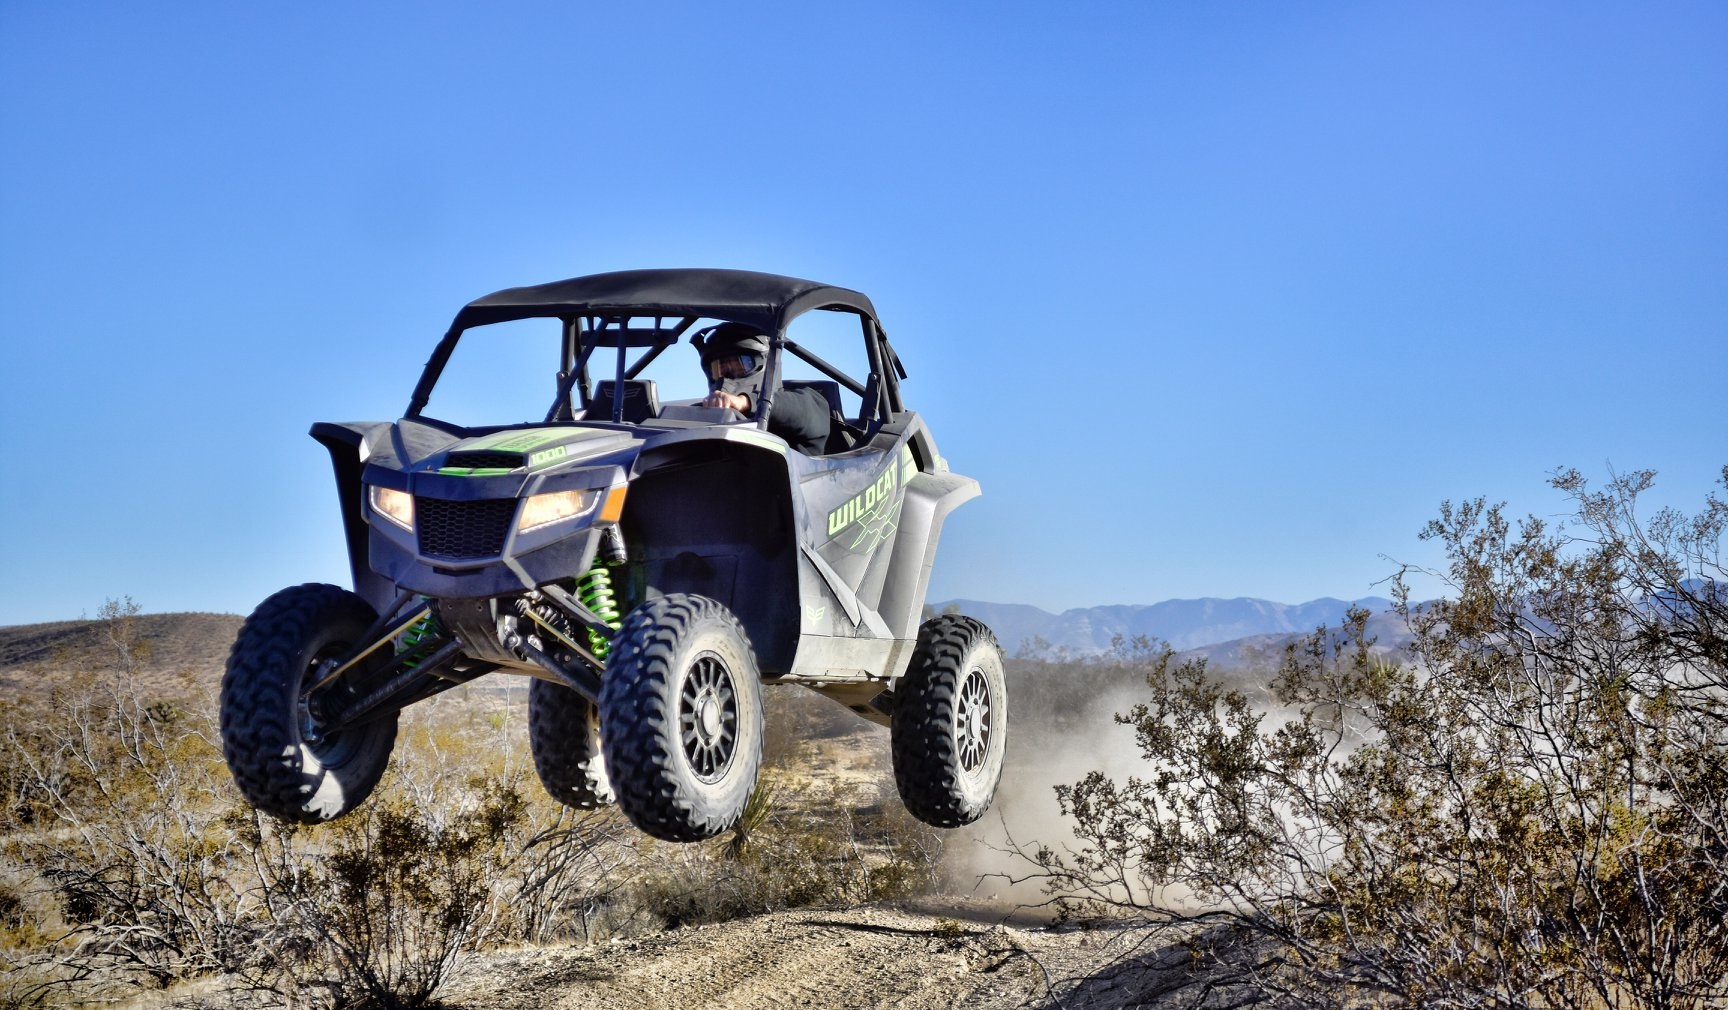 January 17th, 2019 King Of The Hammers in a Wildcat XX